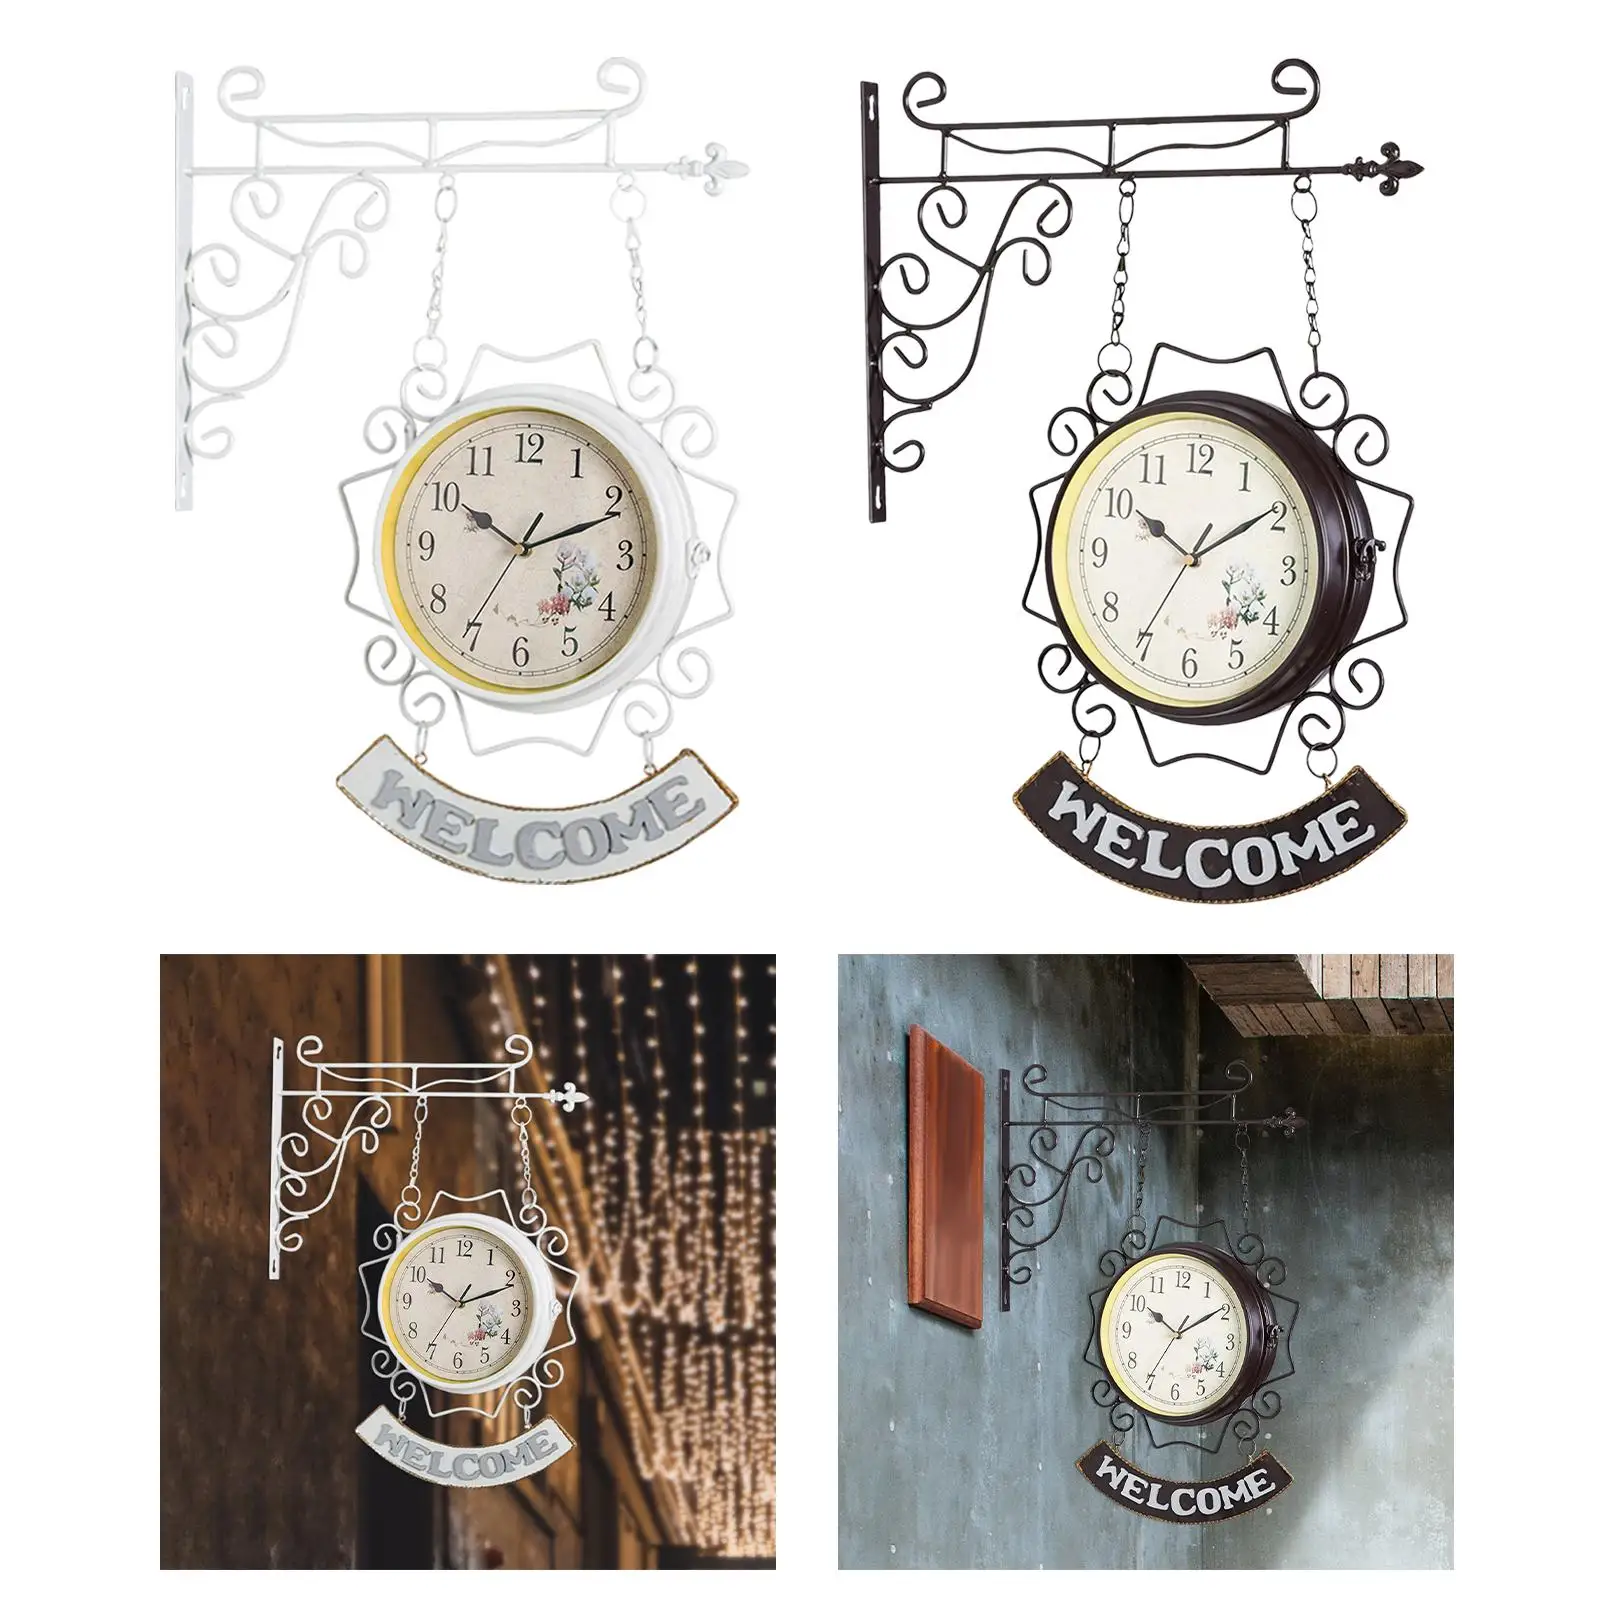 Nordic Double Sided Wall Clock Double Faced Train Station Style Round Silent Decorative for Home Study Outdoor Bedroom Decor